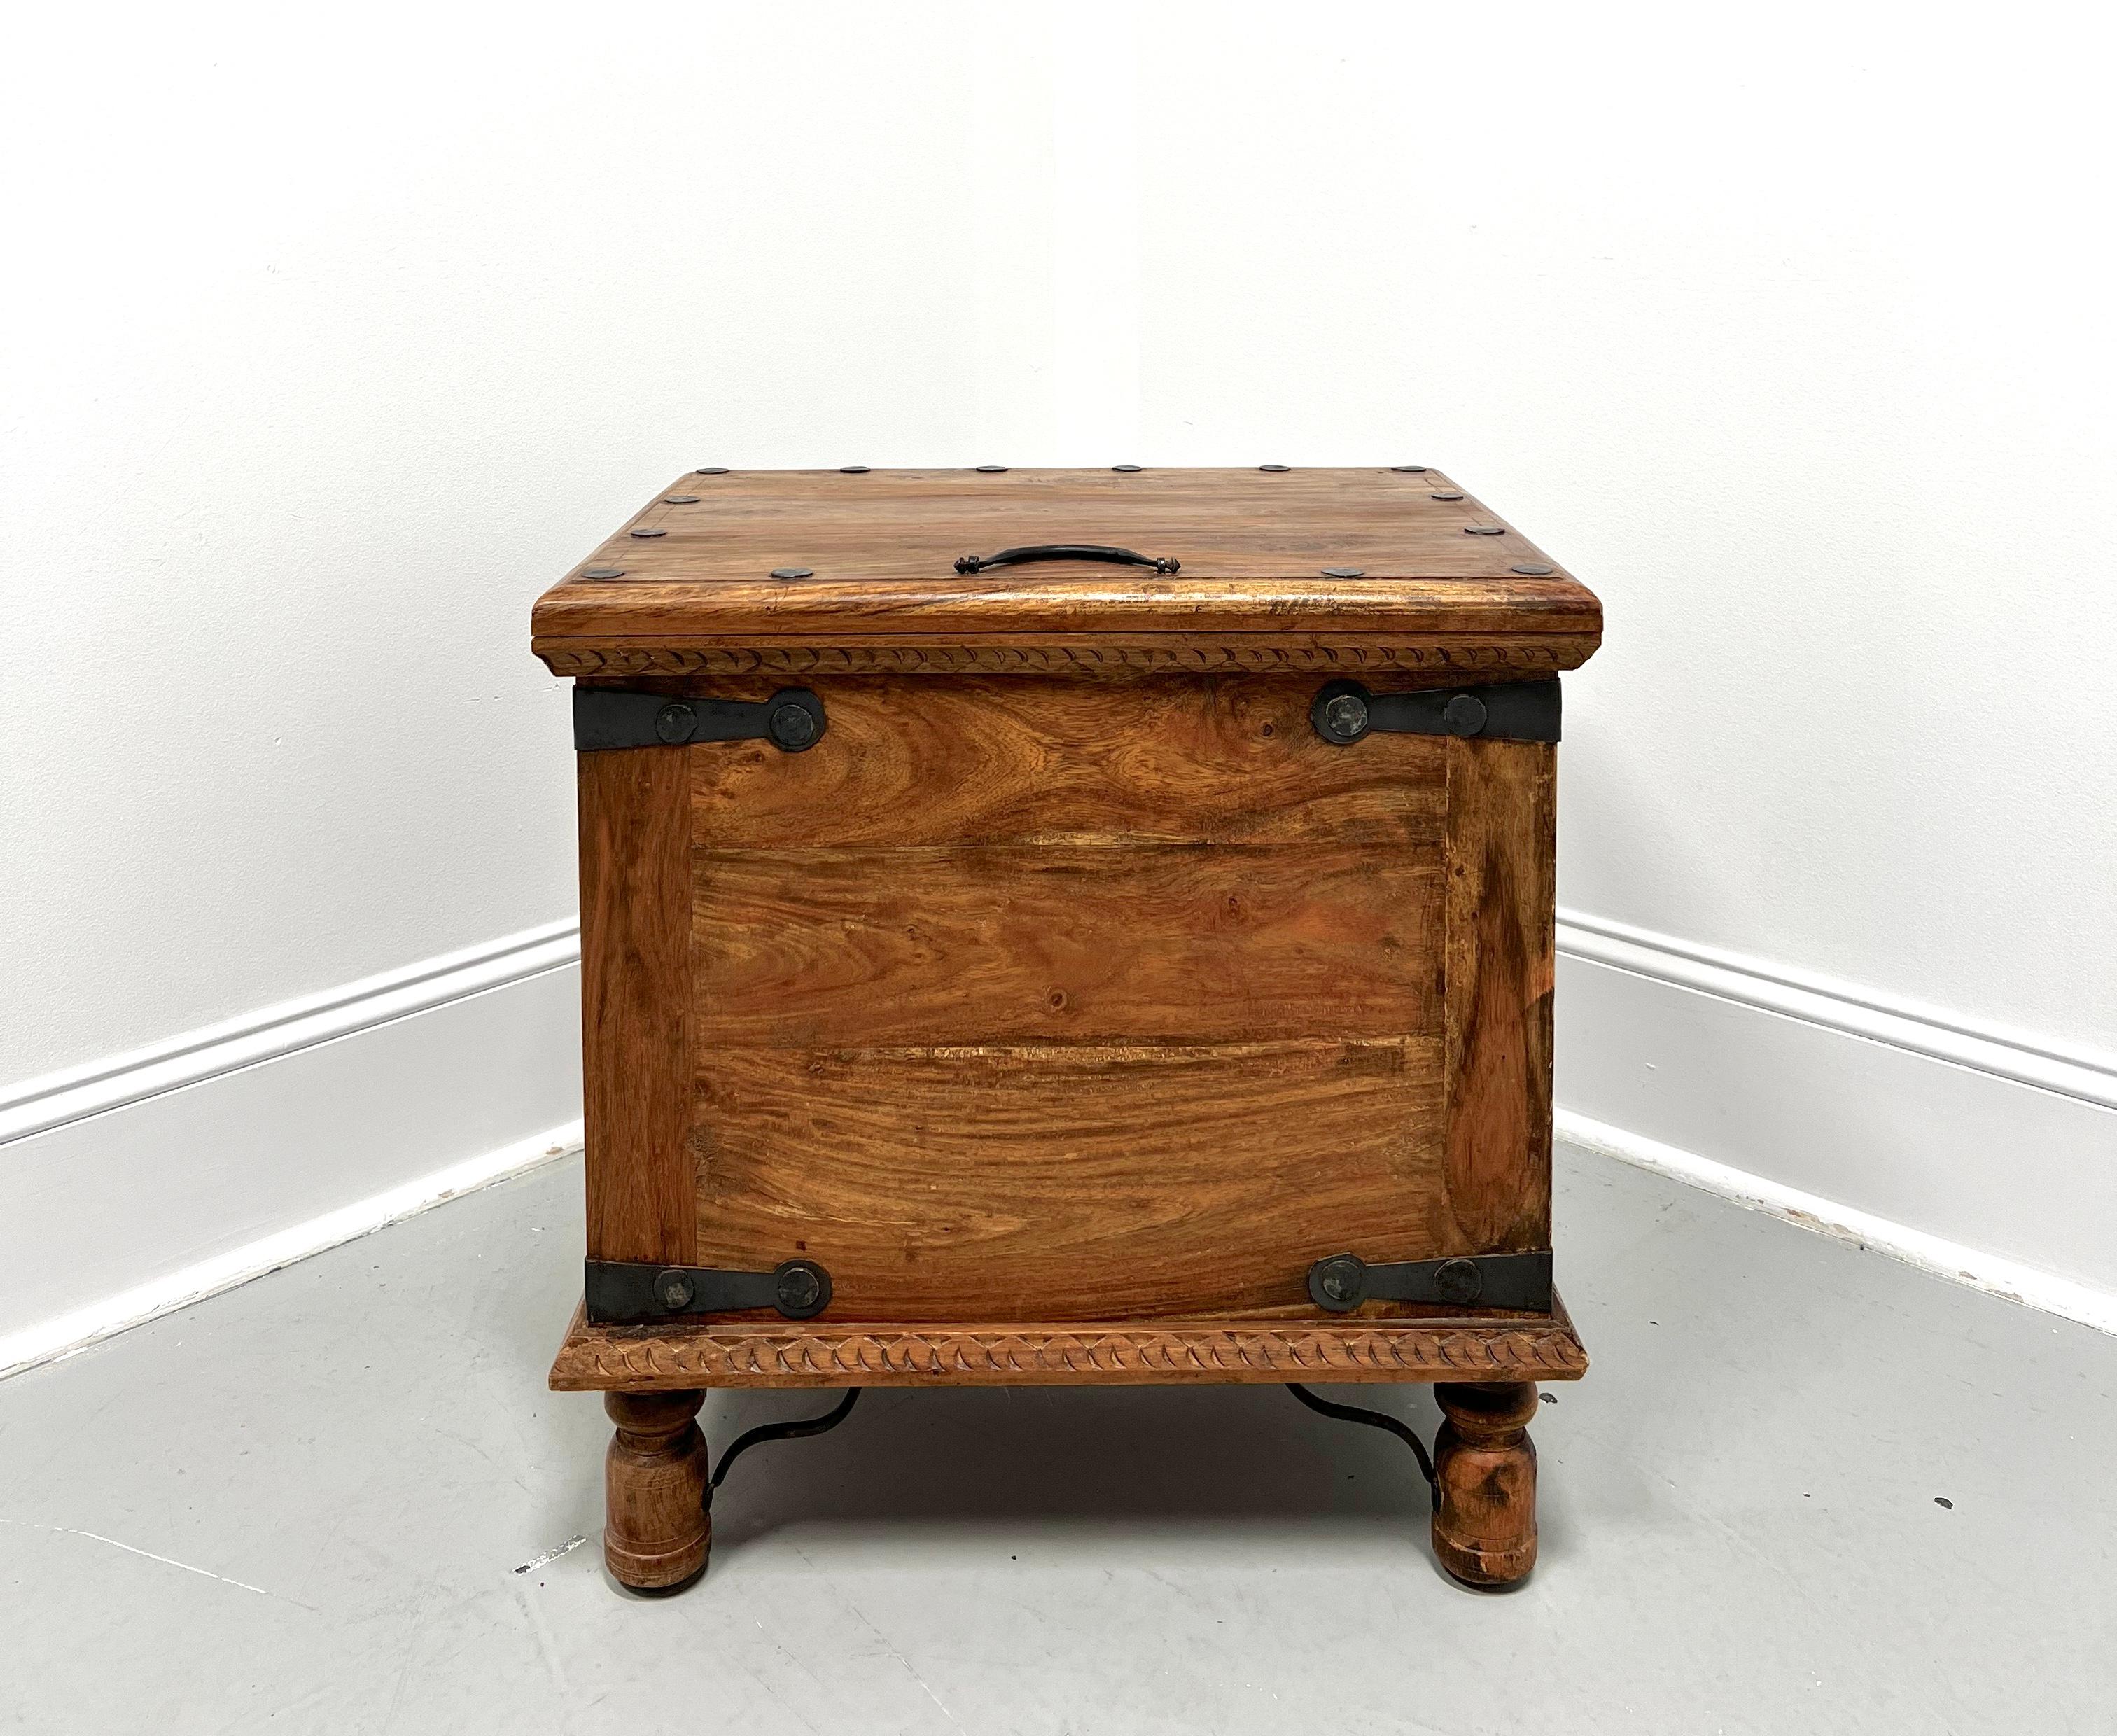 A Rustic style decorative storage trunk on legs or accent table, unbranded. Solid hardwood, lift up lid is on a hinge, bevel edge to the top, decorative metal accents, metal top & side handles, and elevated on turned round legs with curved metal